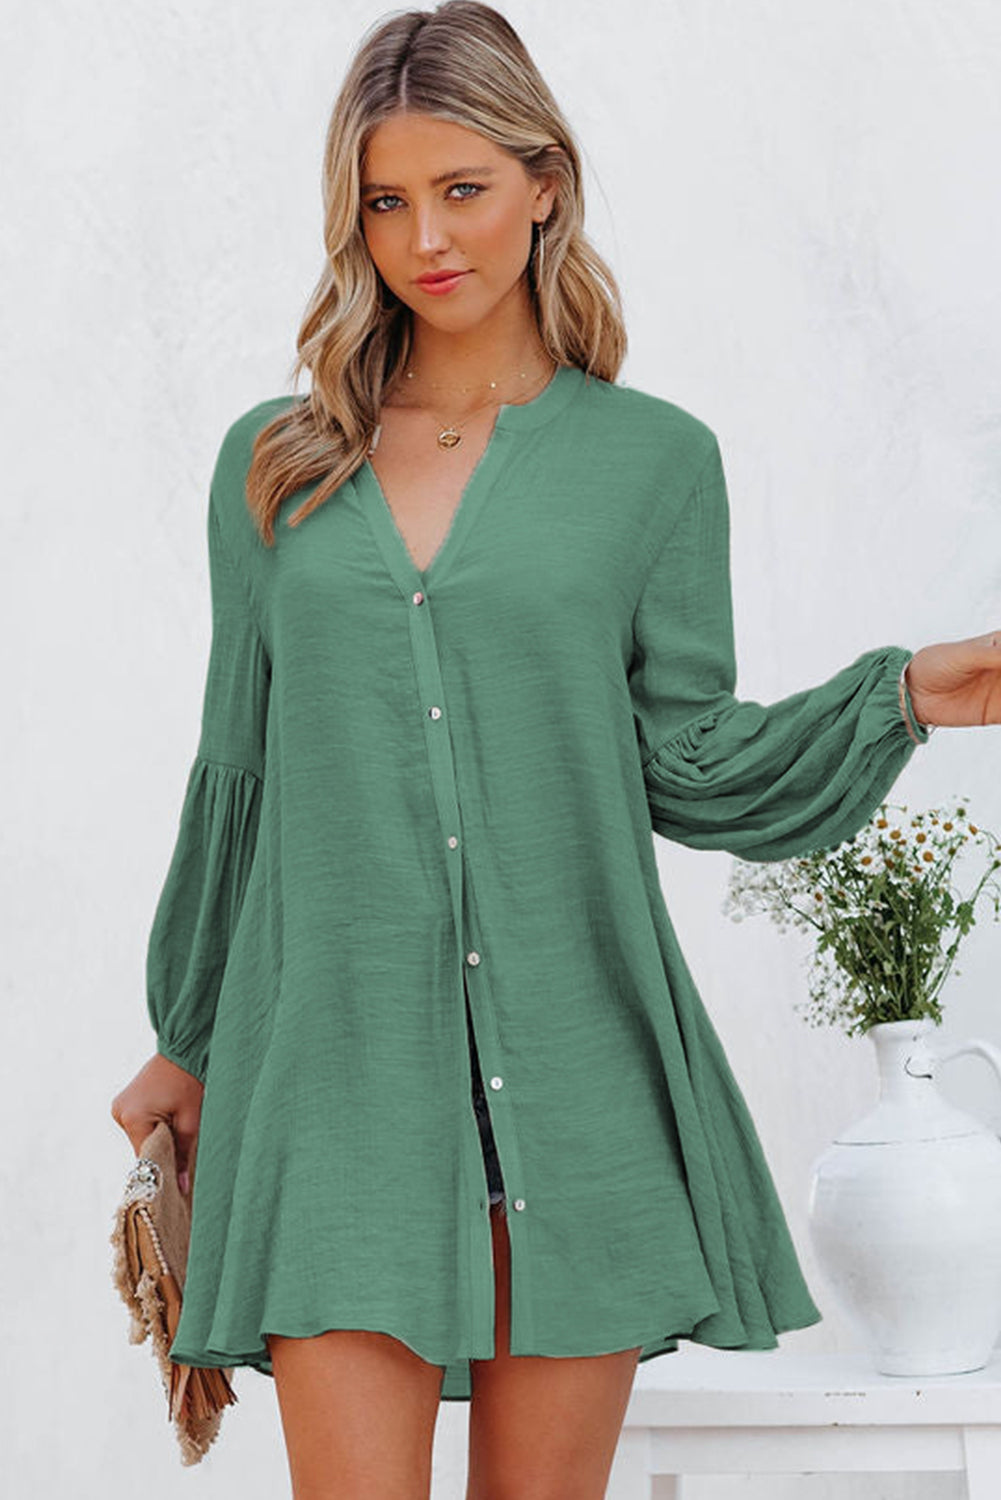 LC2552553-9-S, LC2552553-9-M, LC2552553-9-L, LC2552553-9-XL, LC2552553-9-2XL, Green Womens Long Sleeve Oversized Blouses Tops Button Up Bishop Sleeve Shirt